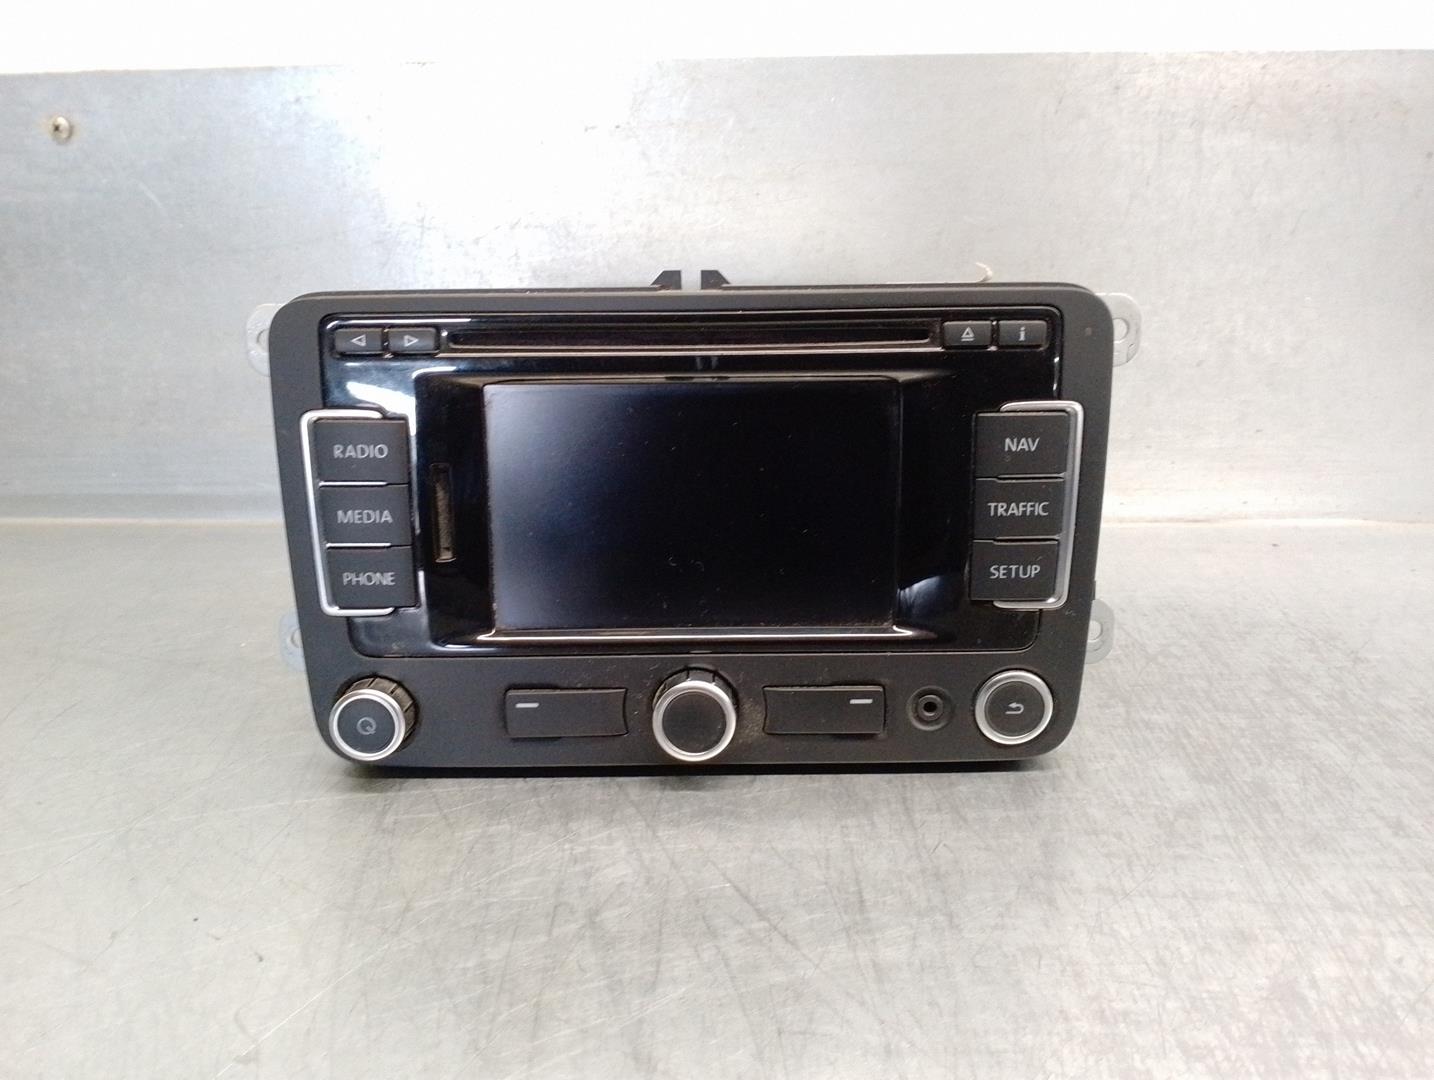 VOLKSWAGEN Golf 6 generation (2008-2015) Music Player Without GPS 3C0035270B, 7612032082 19911443